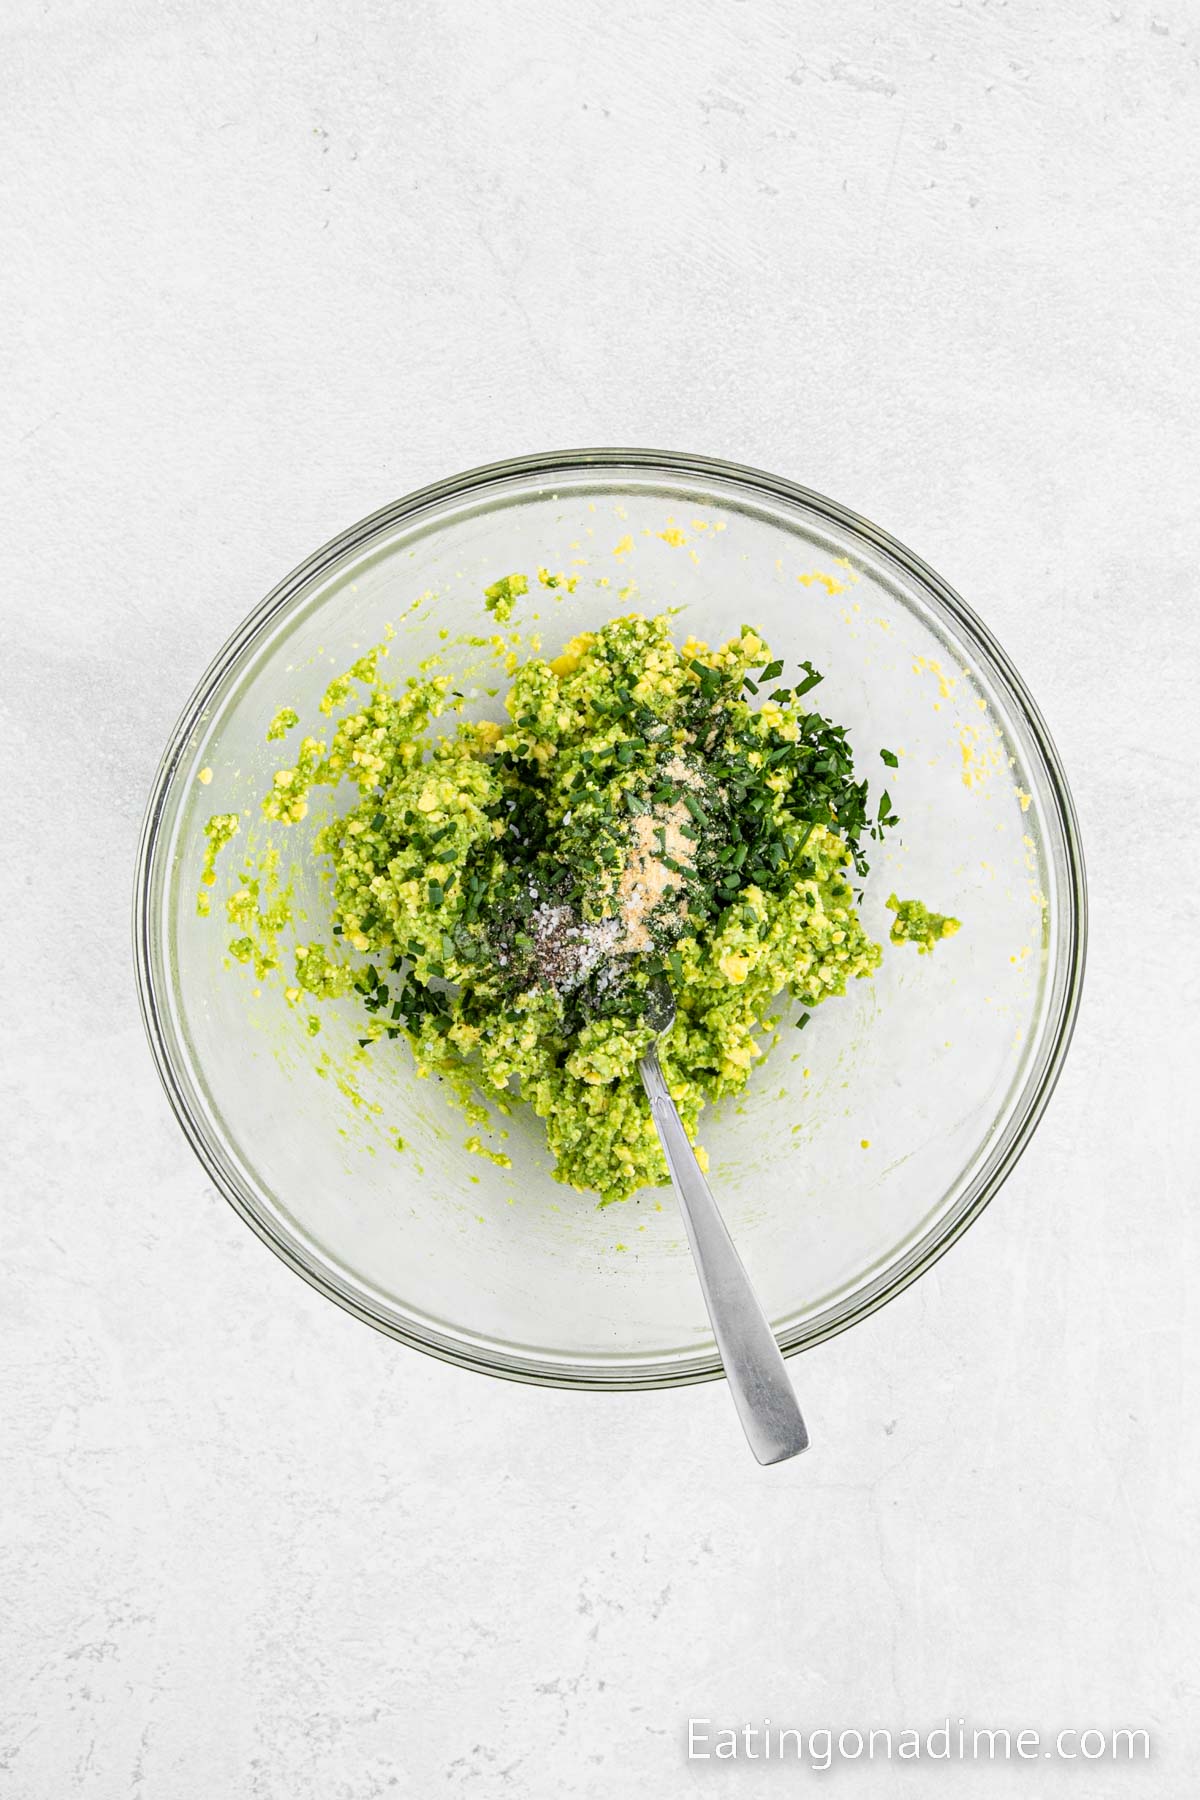 Mixing in the cilantro, chives, salt and pepper into the avocado mixture